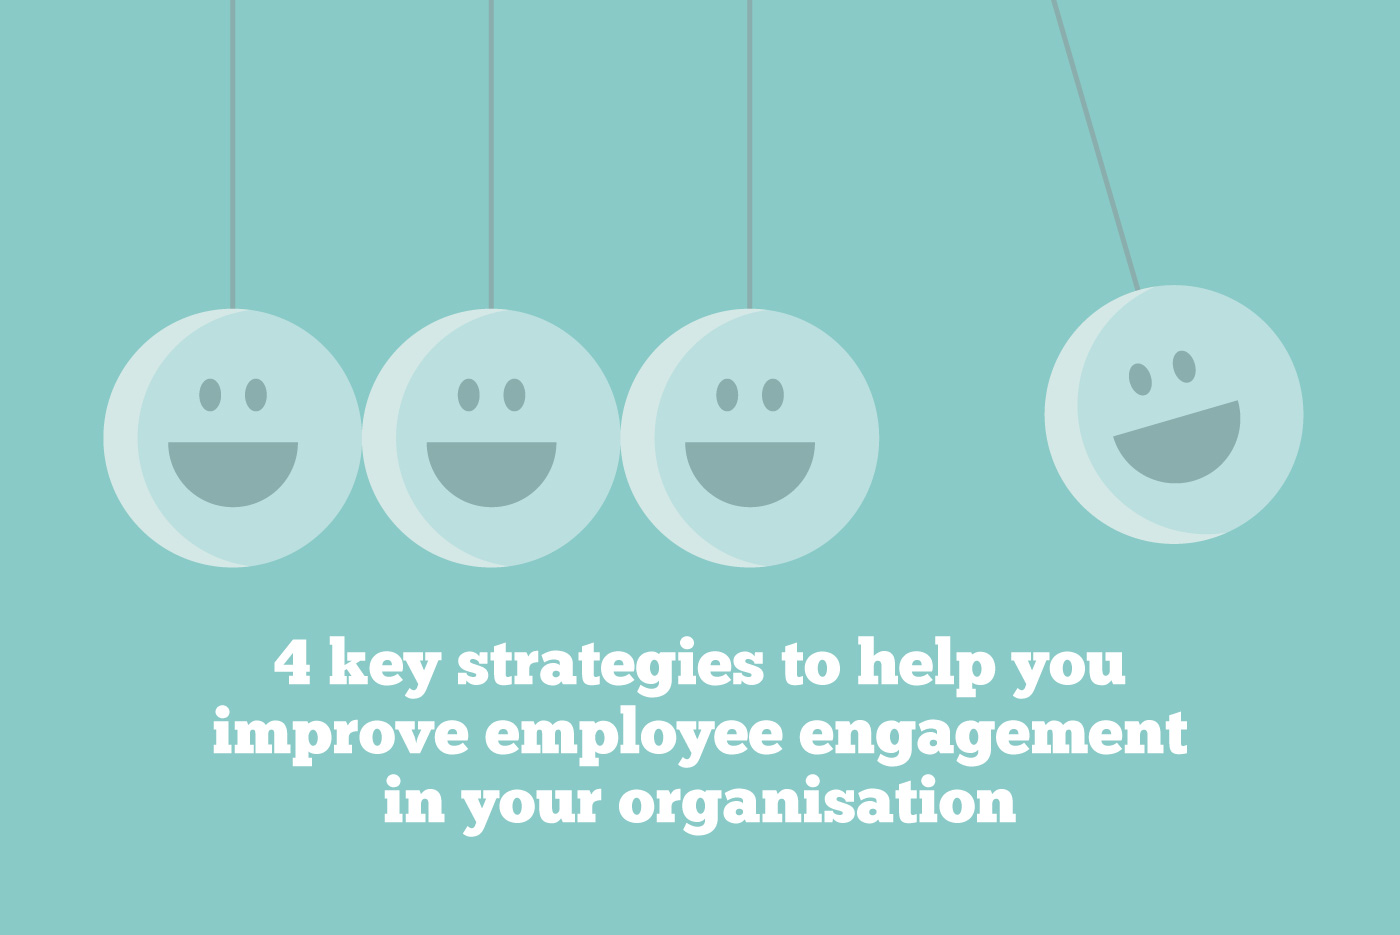 4 key strategies to help you improve employee engagement in your organisation